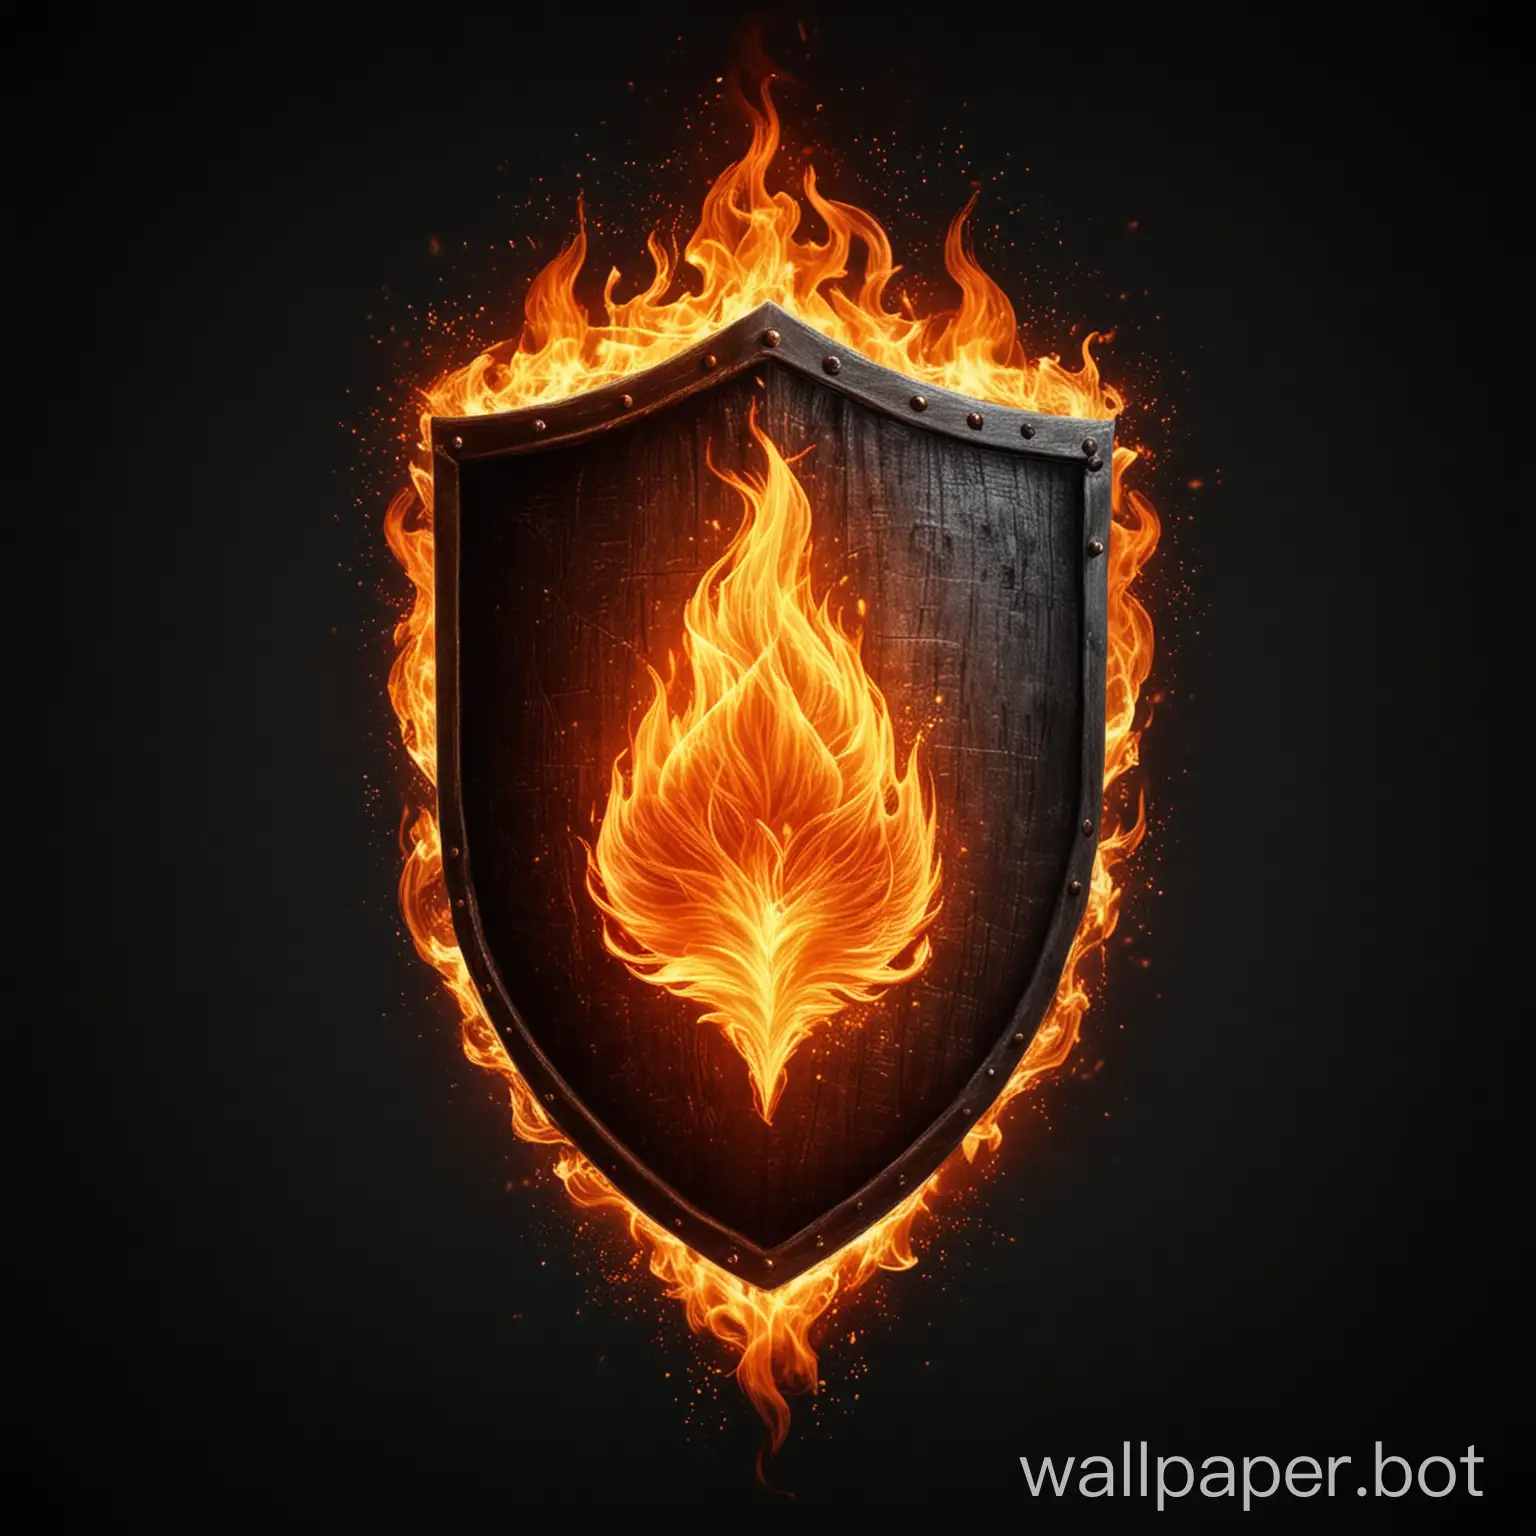 draw a shield made of fire on a black background